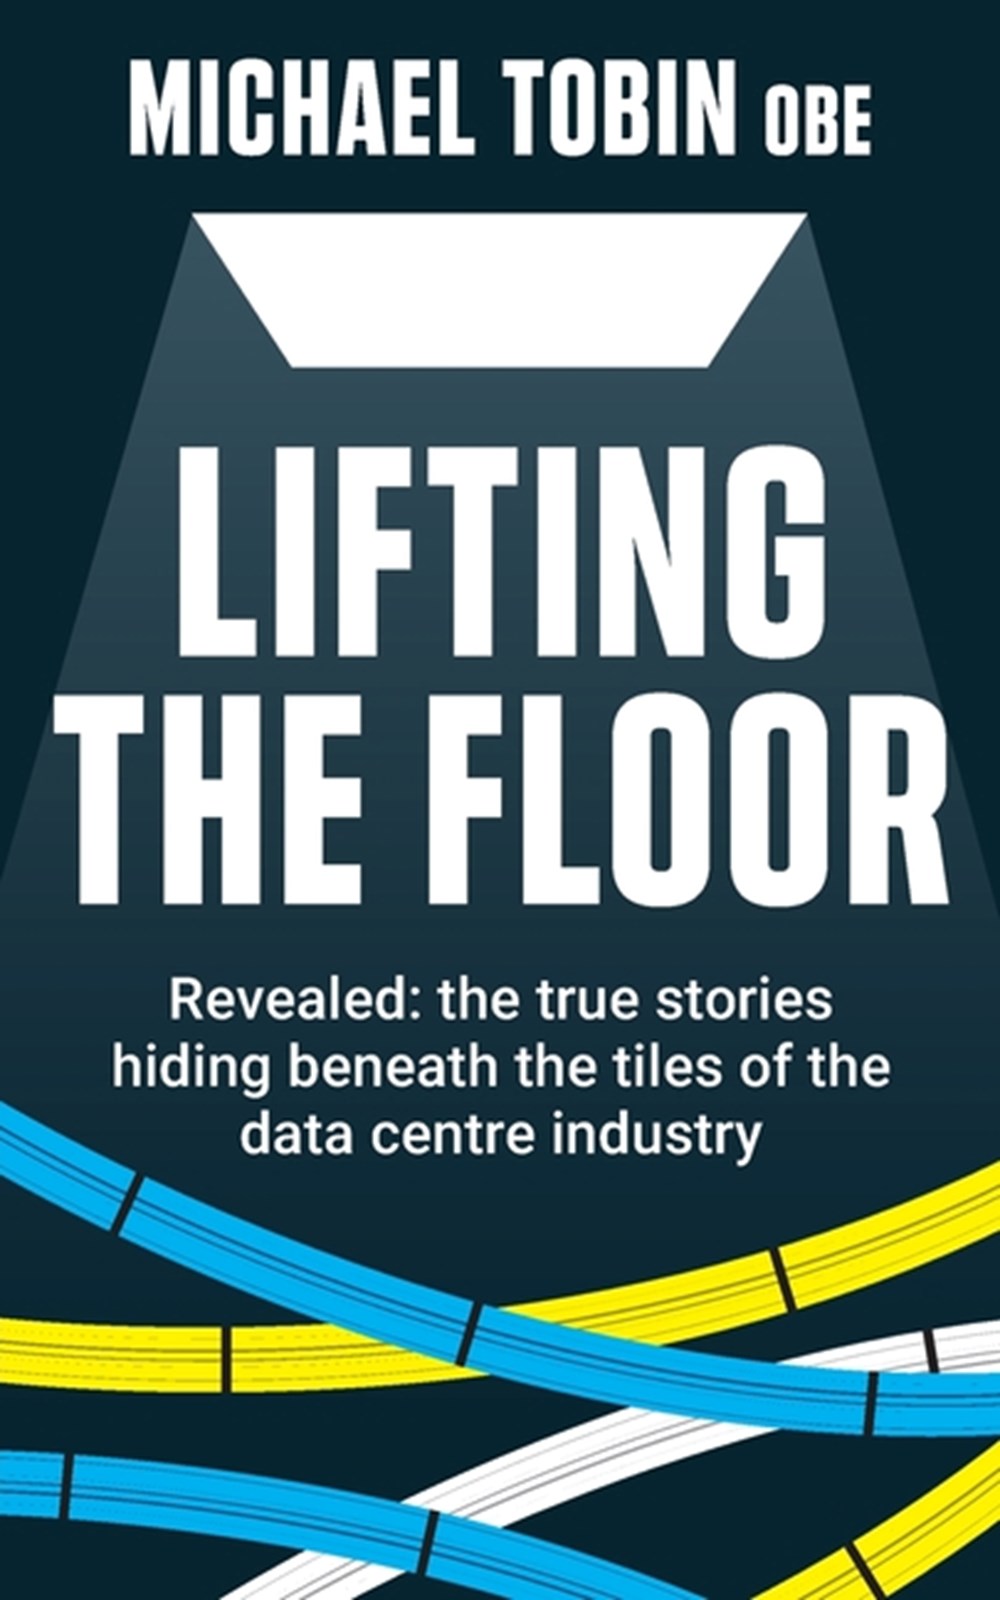 Lifting The Floor Revealed: the true stories hiding beneath the tiles of the data centre industry